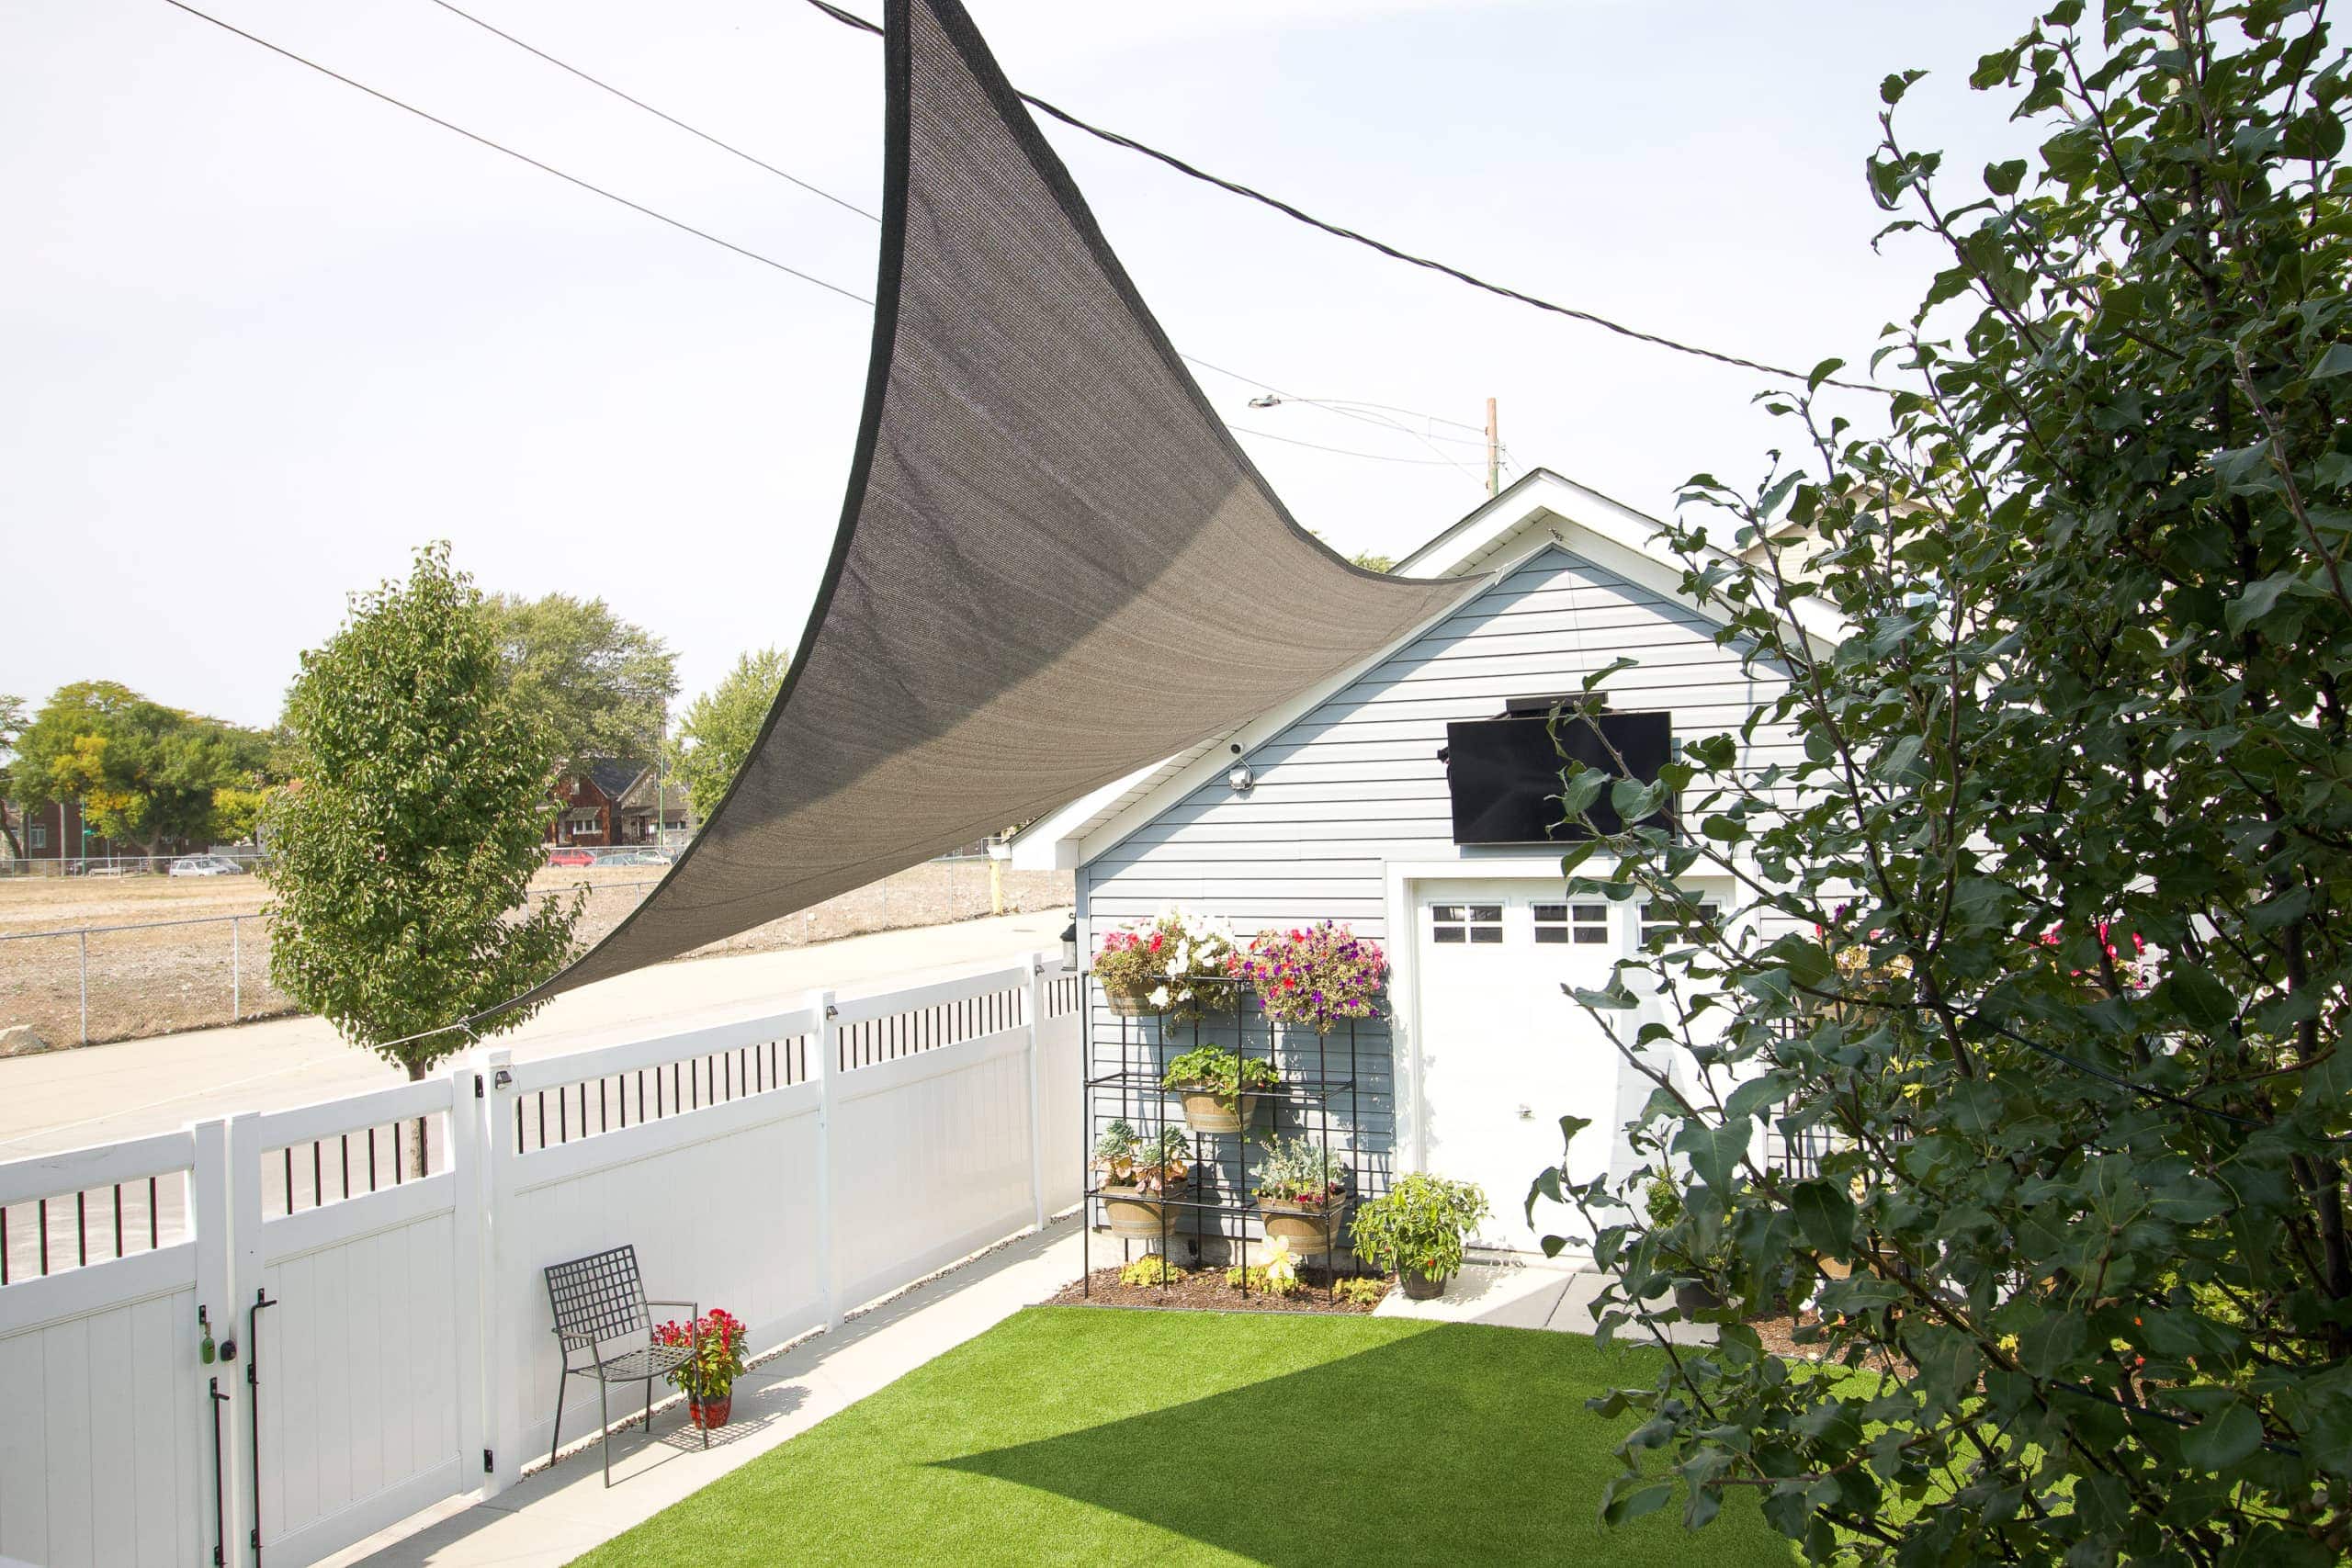 How to add a sail to your backyard outdoor room